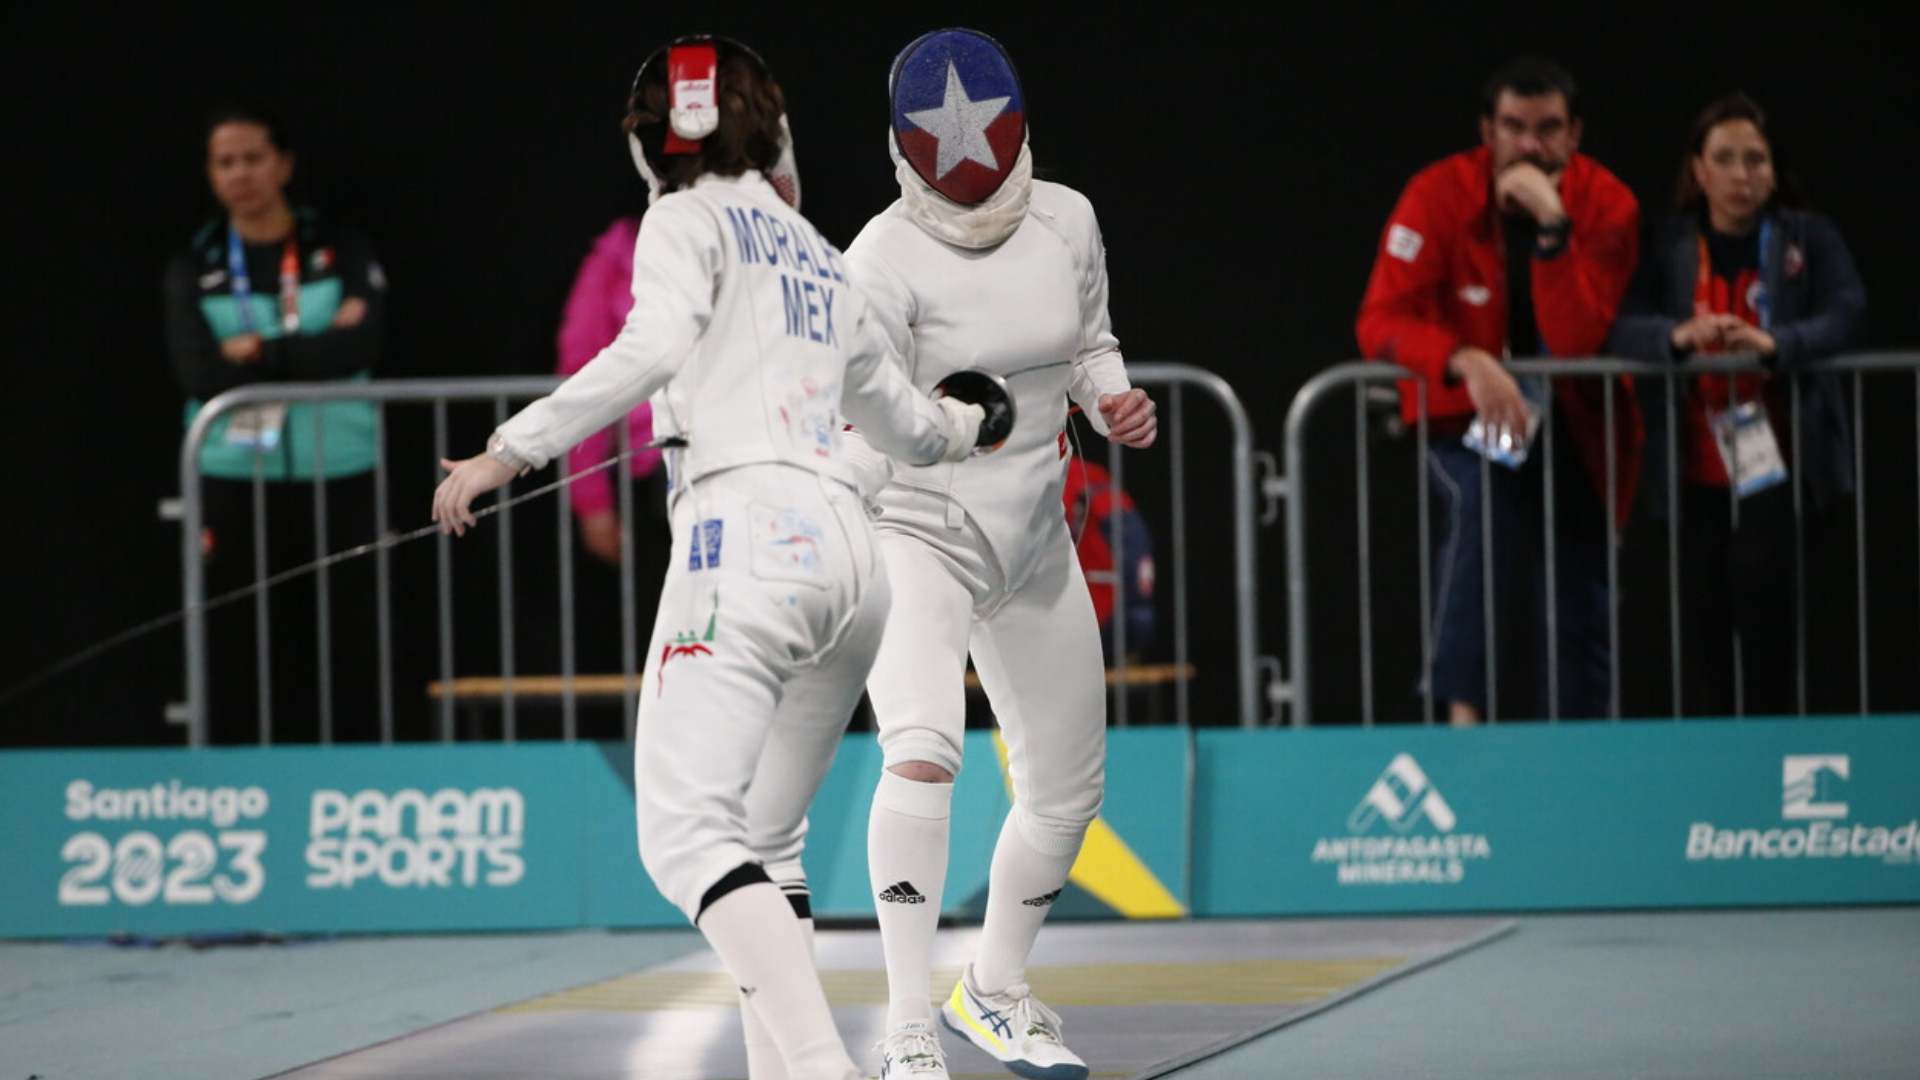 Chile adds another bronze in fencing with Analía Fernández